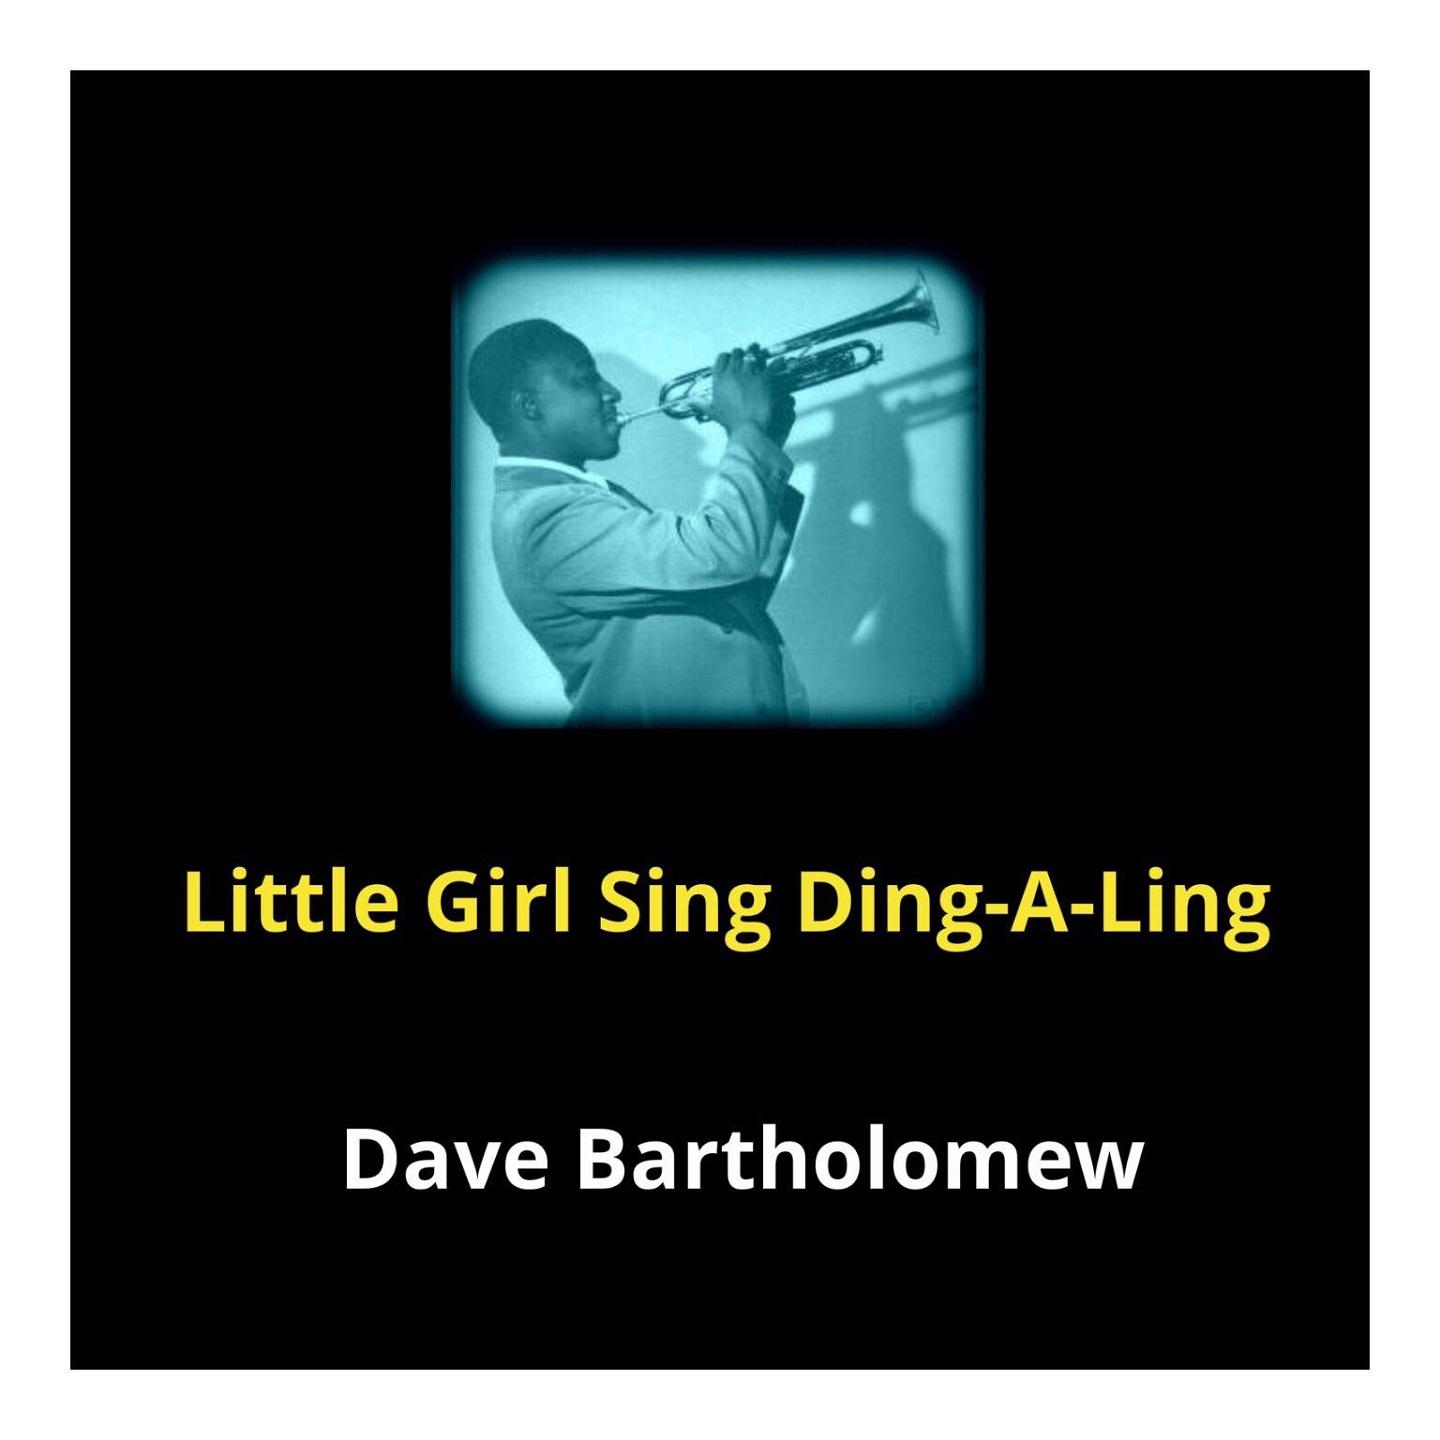 Little Girl Sing Ding-a-Ling